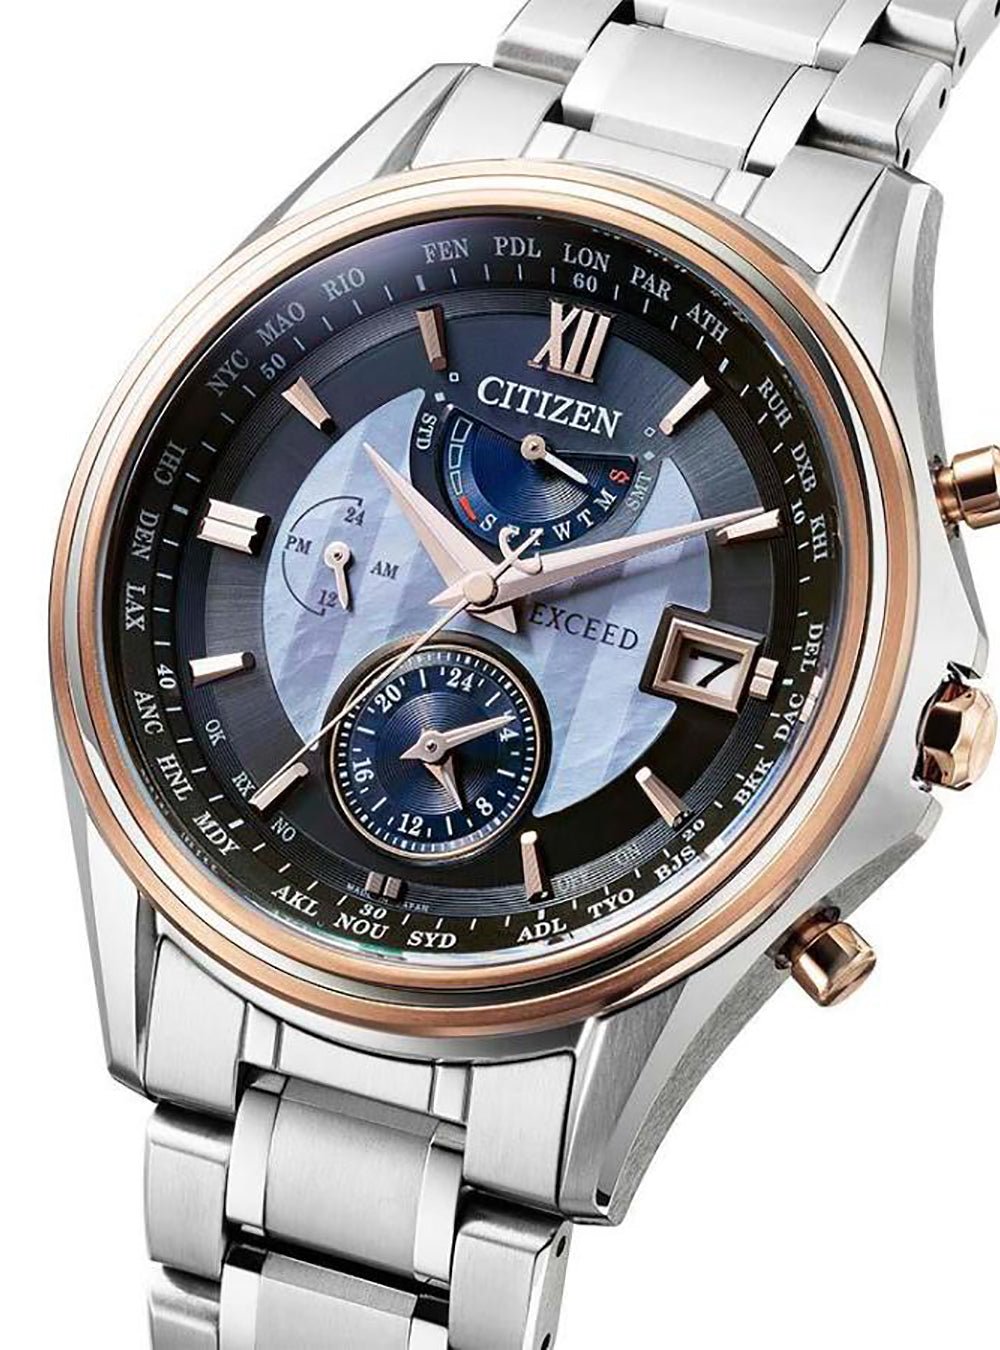 CITIZEN EXCEED CC4030-58L MADE IN JAPAN LIMITED 600 JDM – japan-select